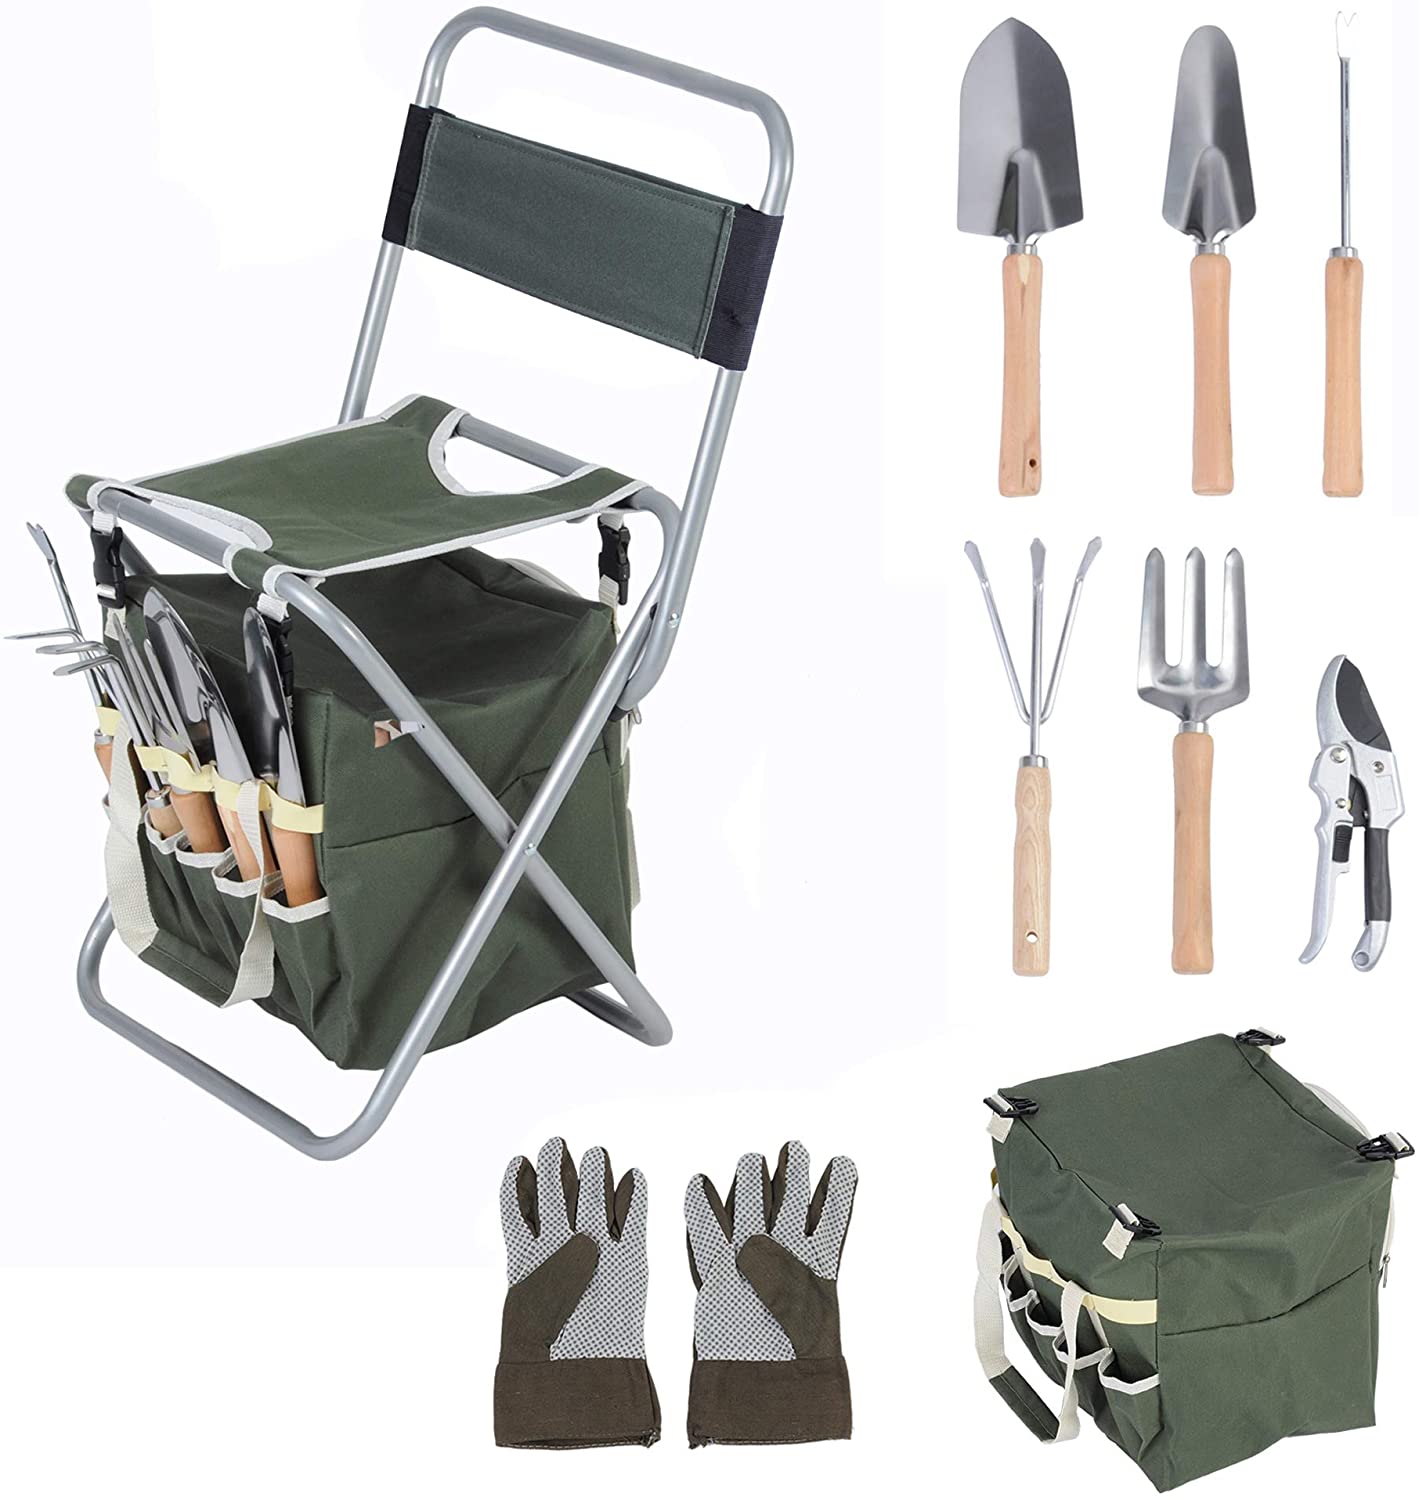 Garden Tool Set 9 Piece Heavy Duty Gardening Tools with Ergonomic Wooden Handle Sturdy Stool with Detachable Tool Kit Perfect for Different Kinds of Gardening